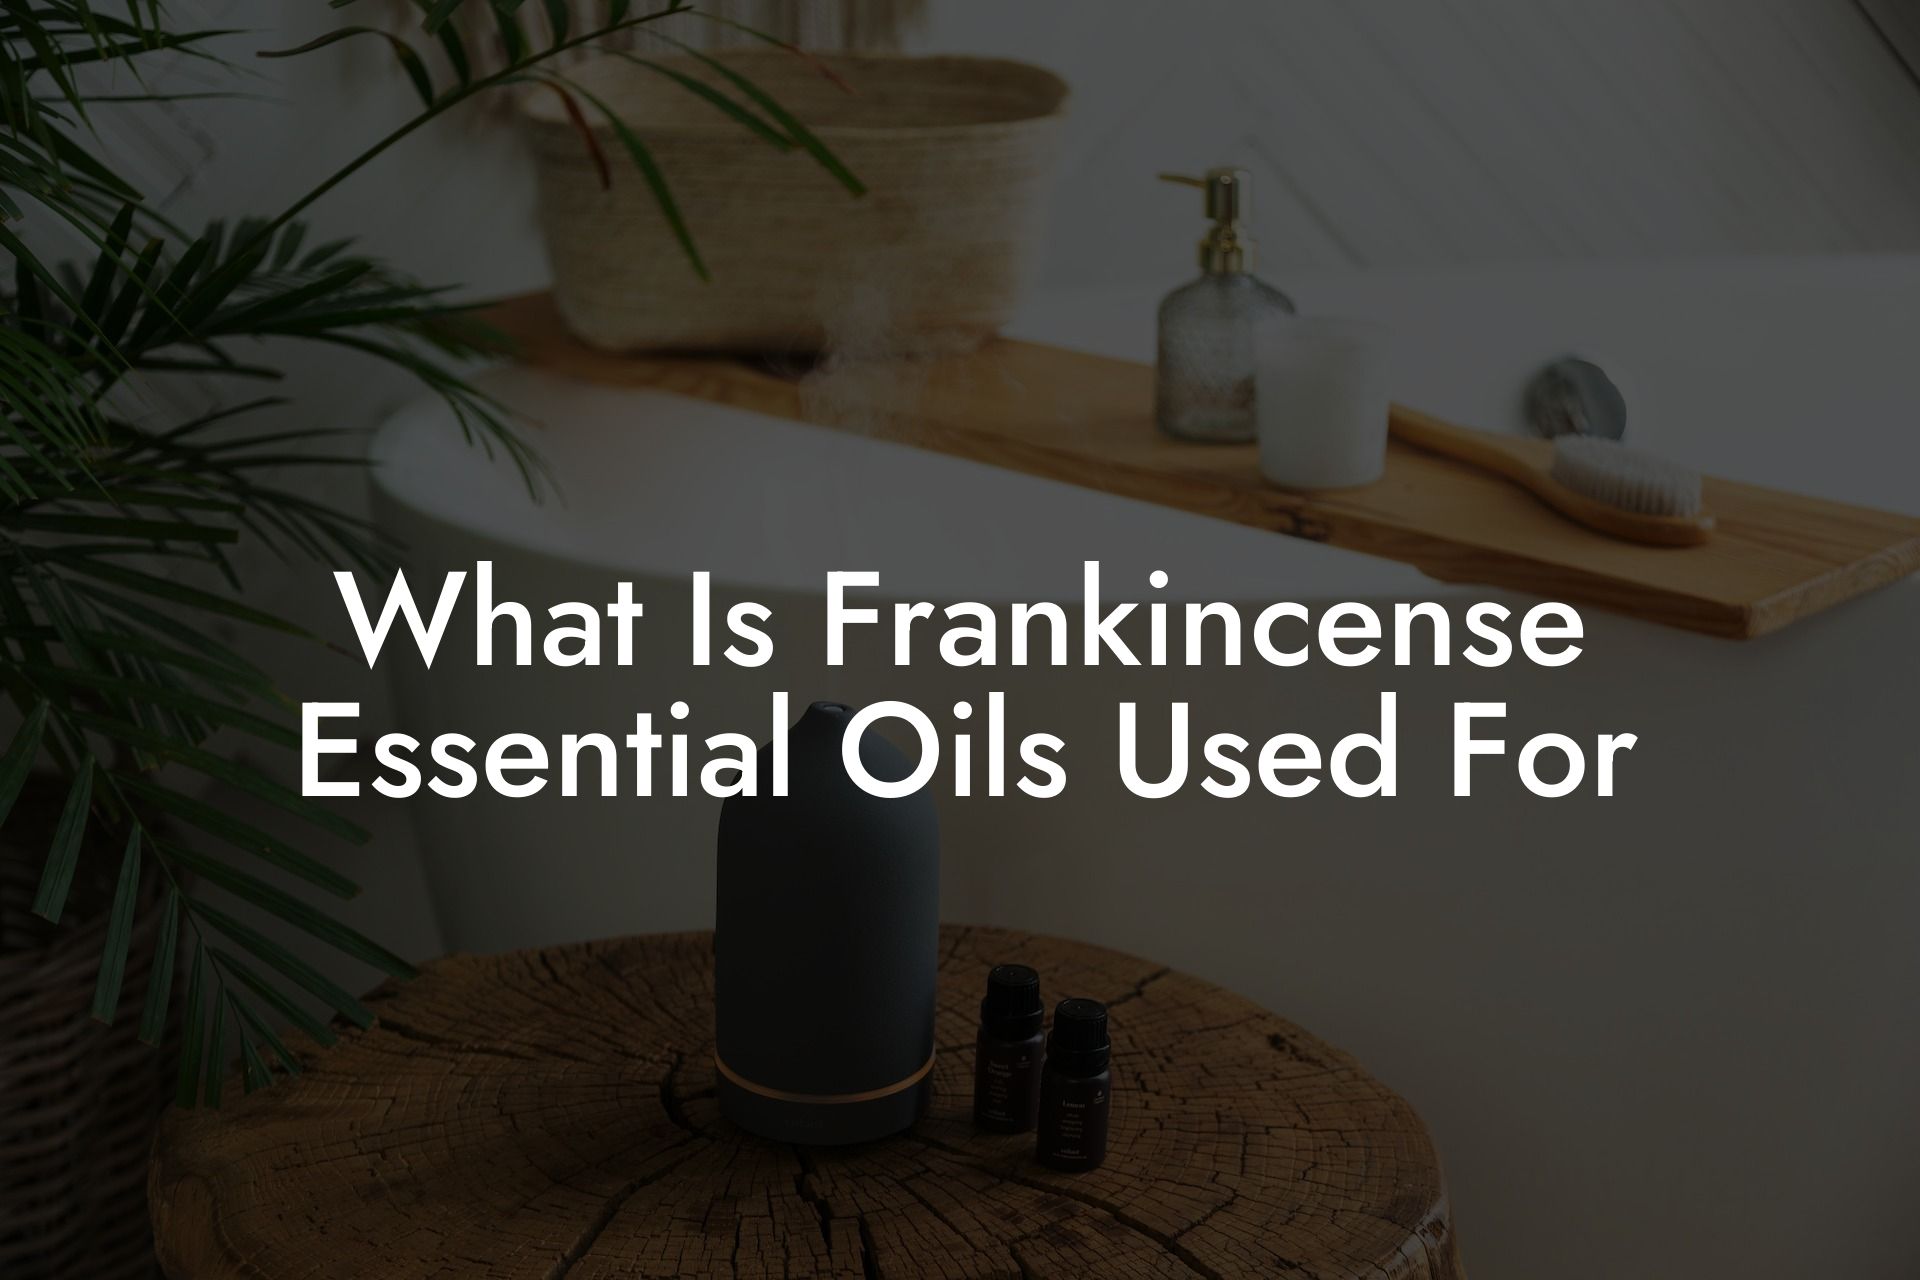 What Is Frankincense Essential Oils Used For